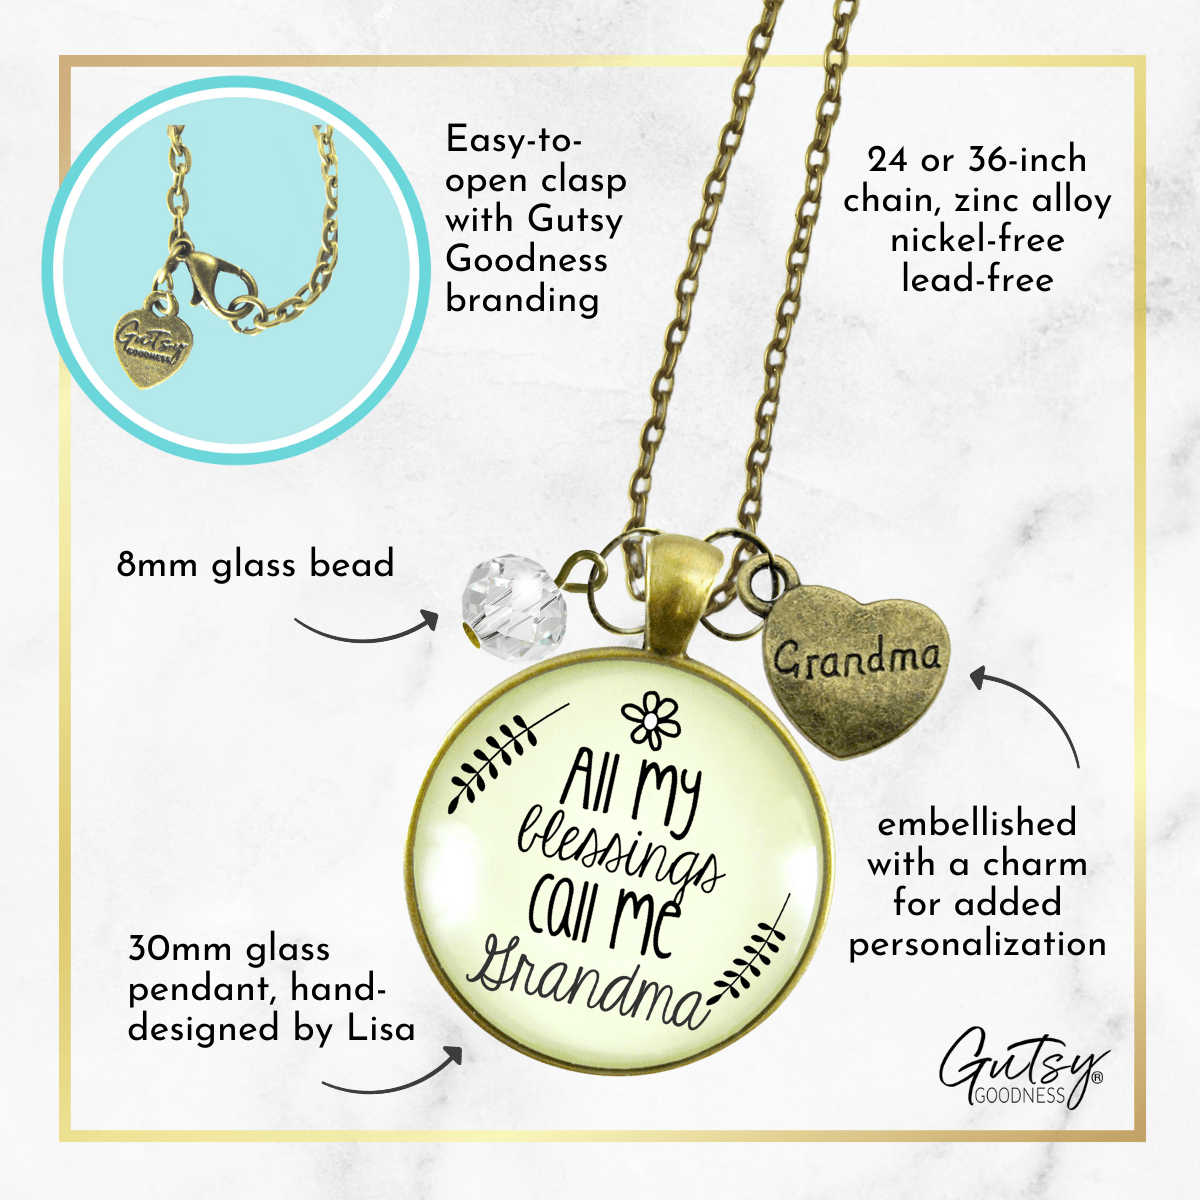 Gutsy Goodness Grandma Necklace All My Blessings Grandmother Gift Jewelry - Gutsy Goodness Handmade Jewelry;All My Blessings Call Me Grandma - Gutsy Goodness Handmade Jewelry Gifts